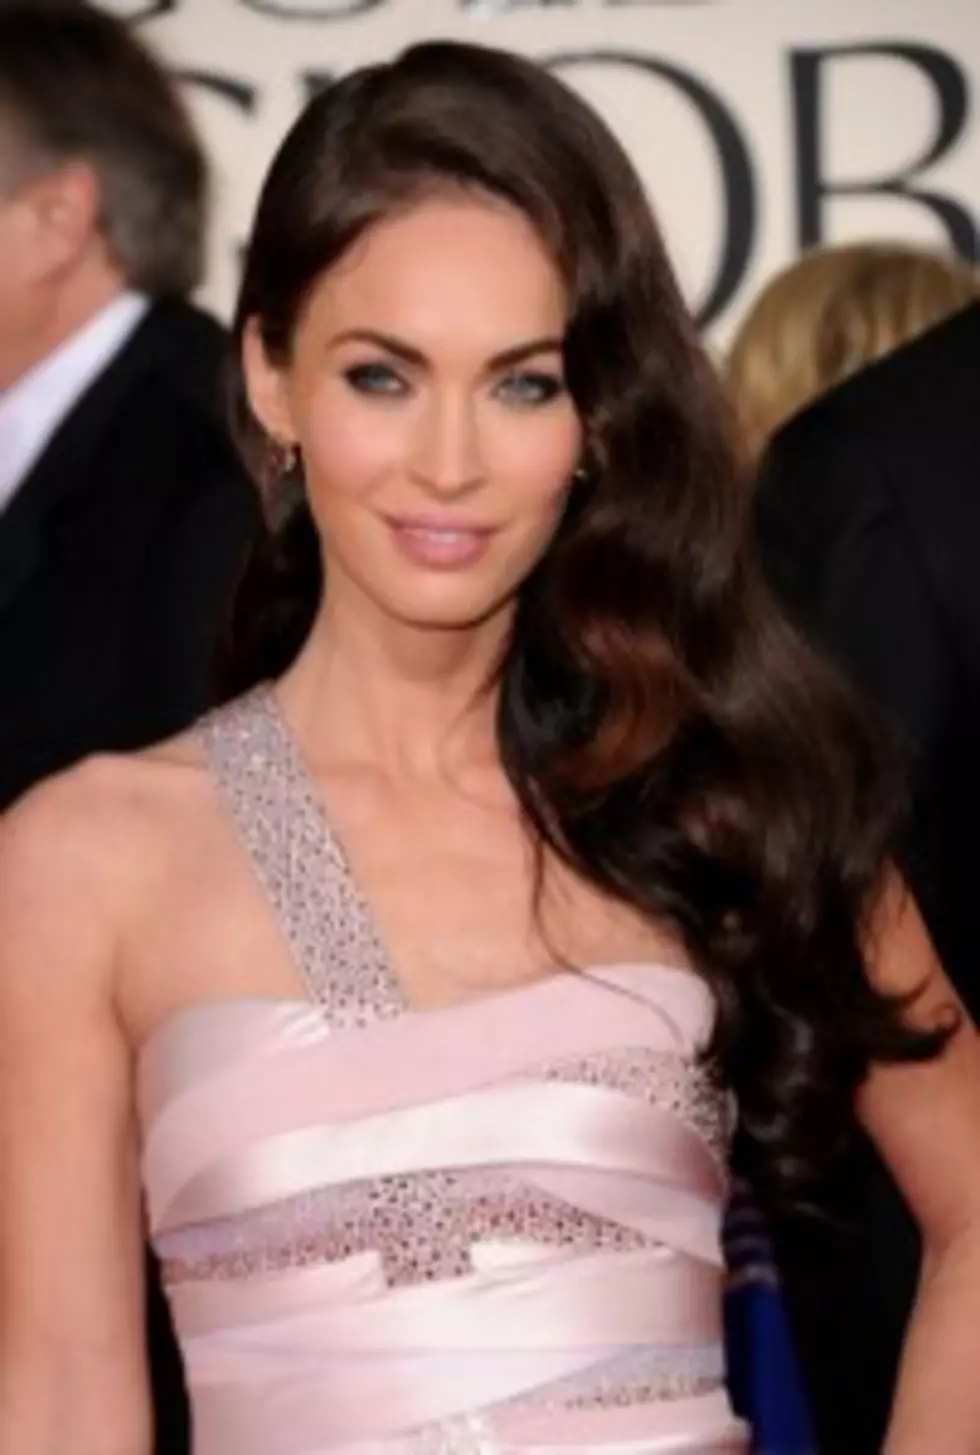 The Real Reason Megan Fox Is No Longer With The Transformers Franchise